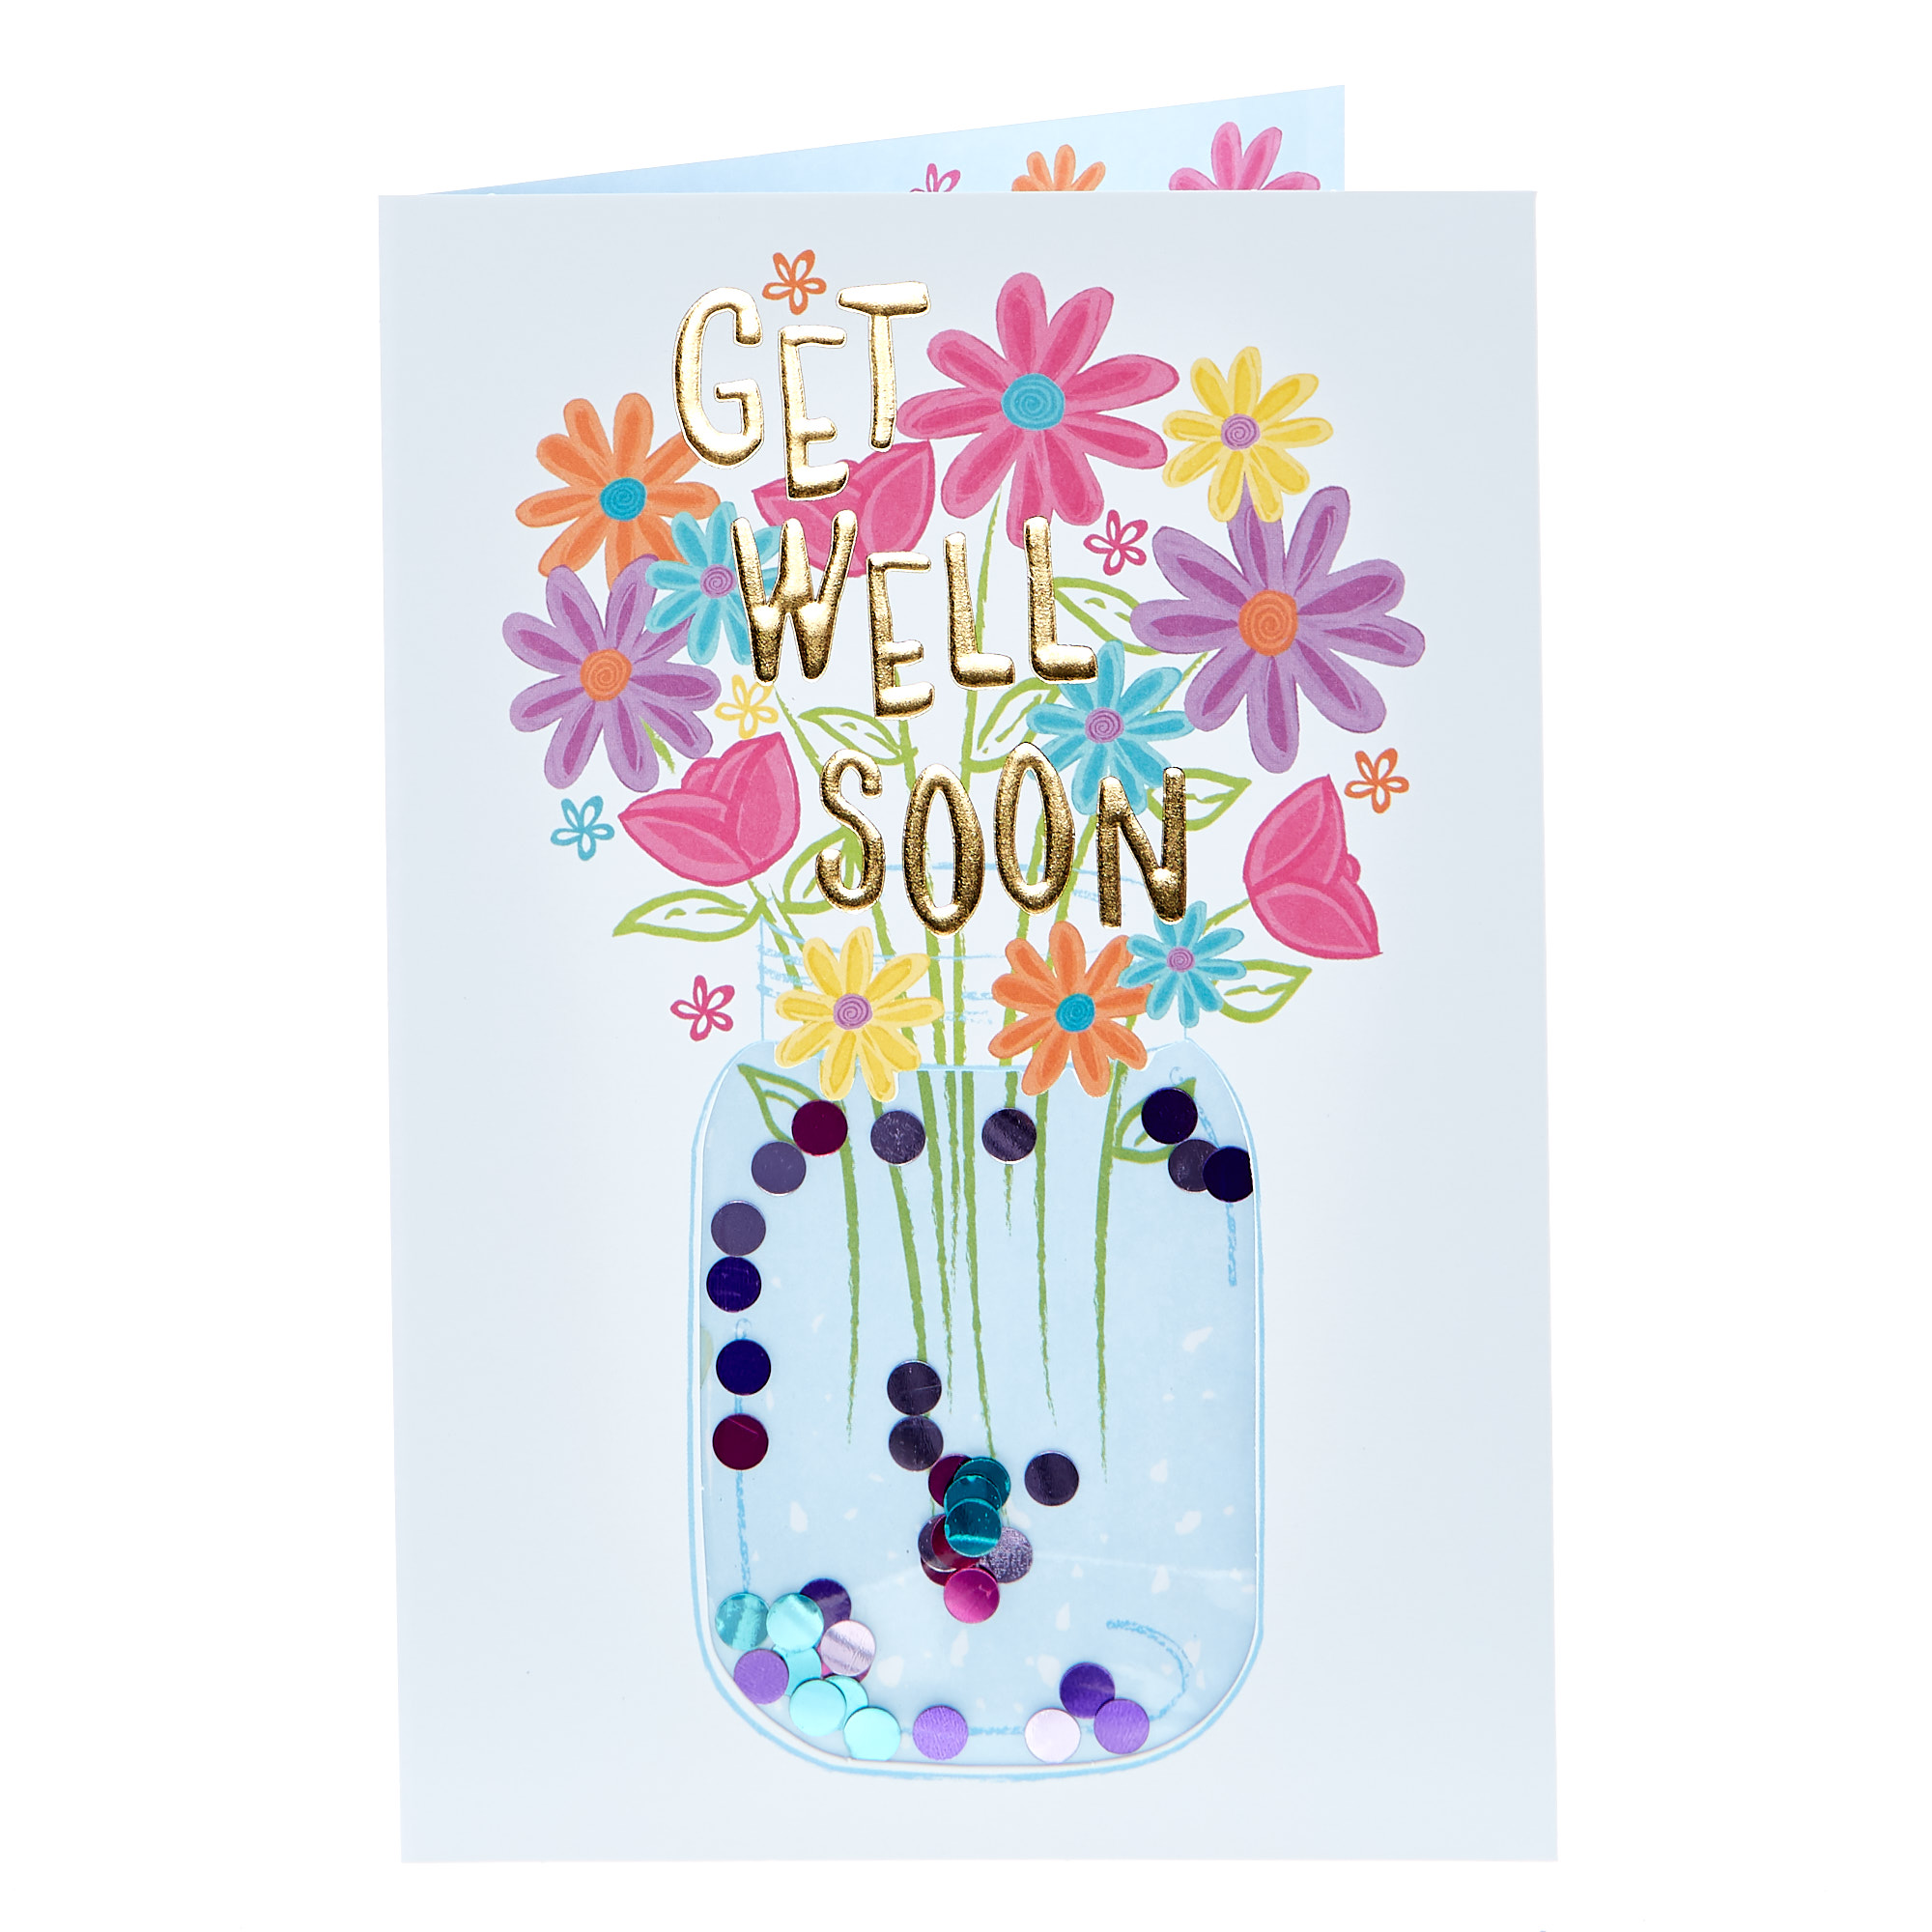 Get Well Soon Card - This Comes To Say...